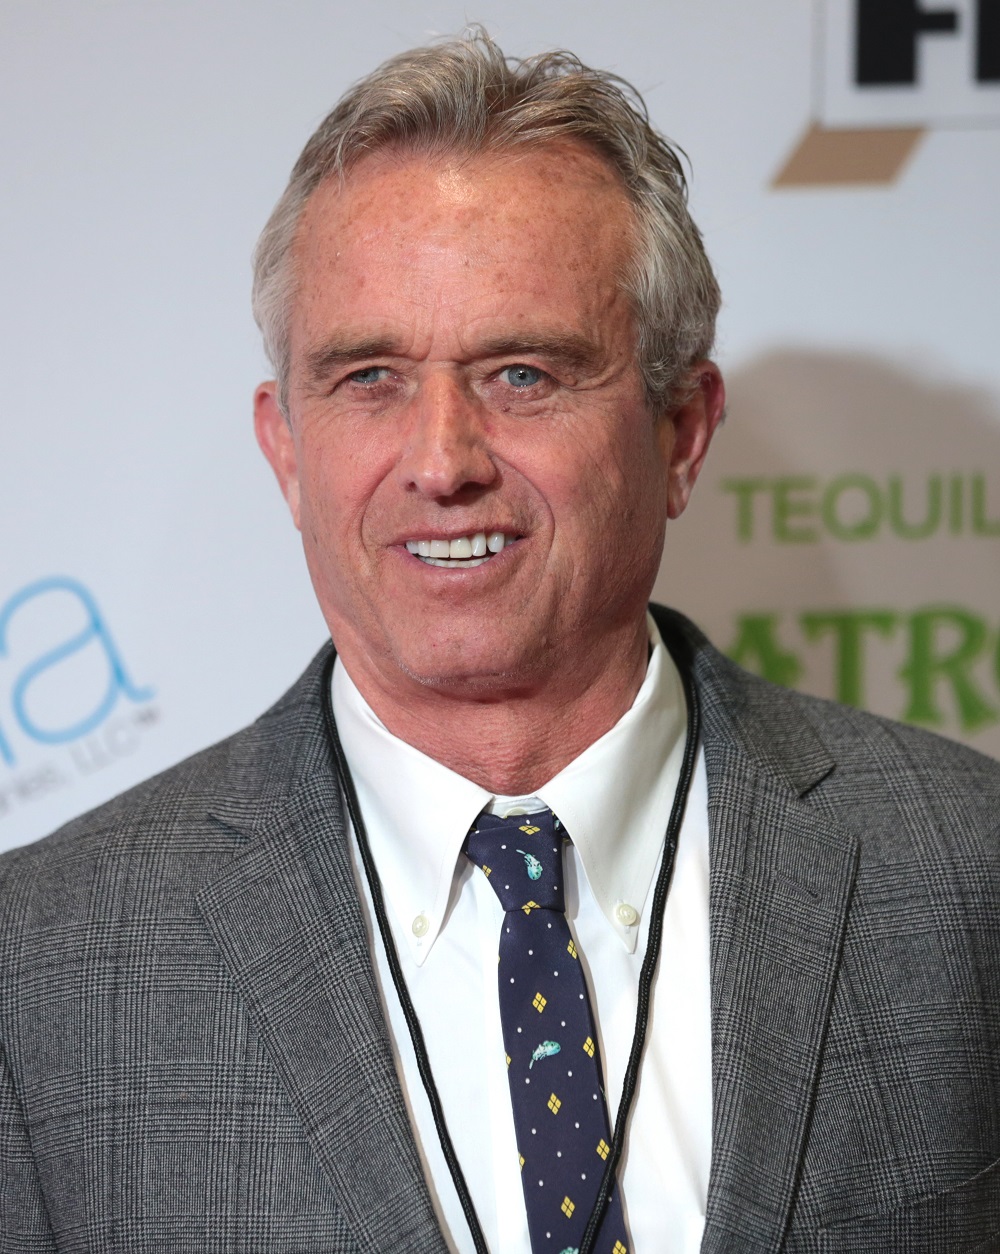 Presidential candidate RFK Jr had a brain worm, has recovered, campaign says 